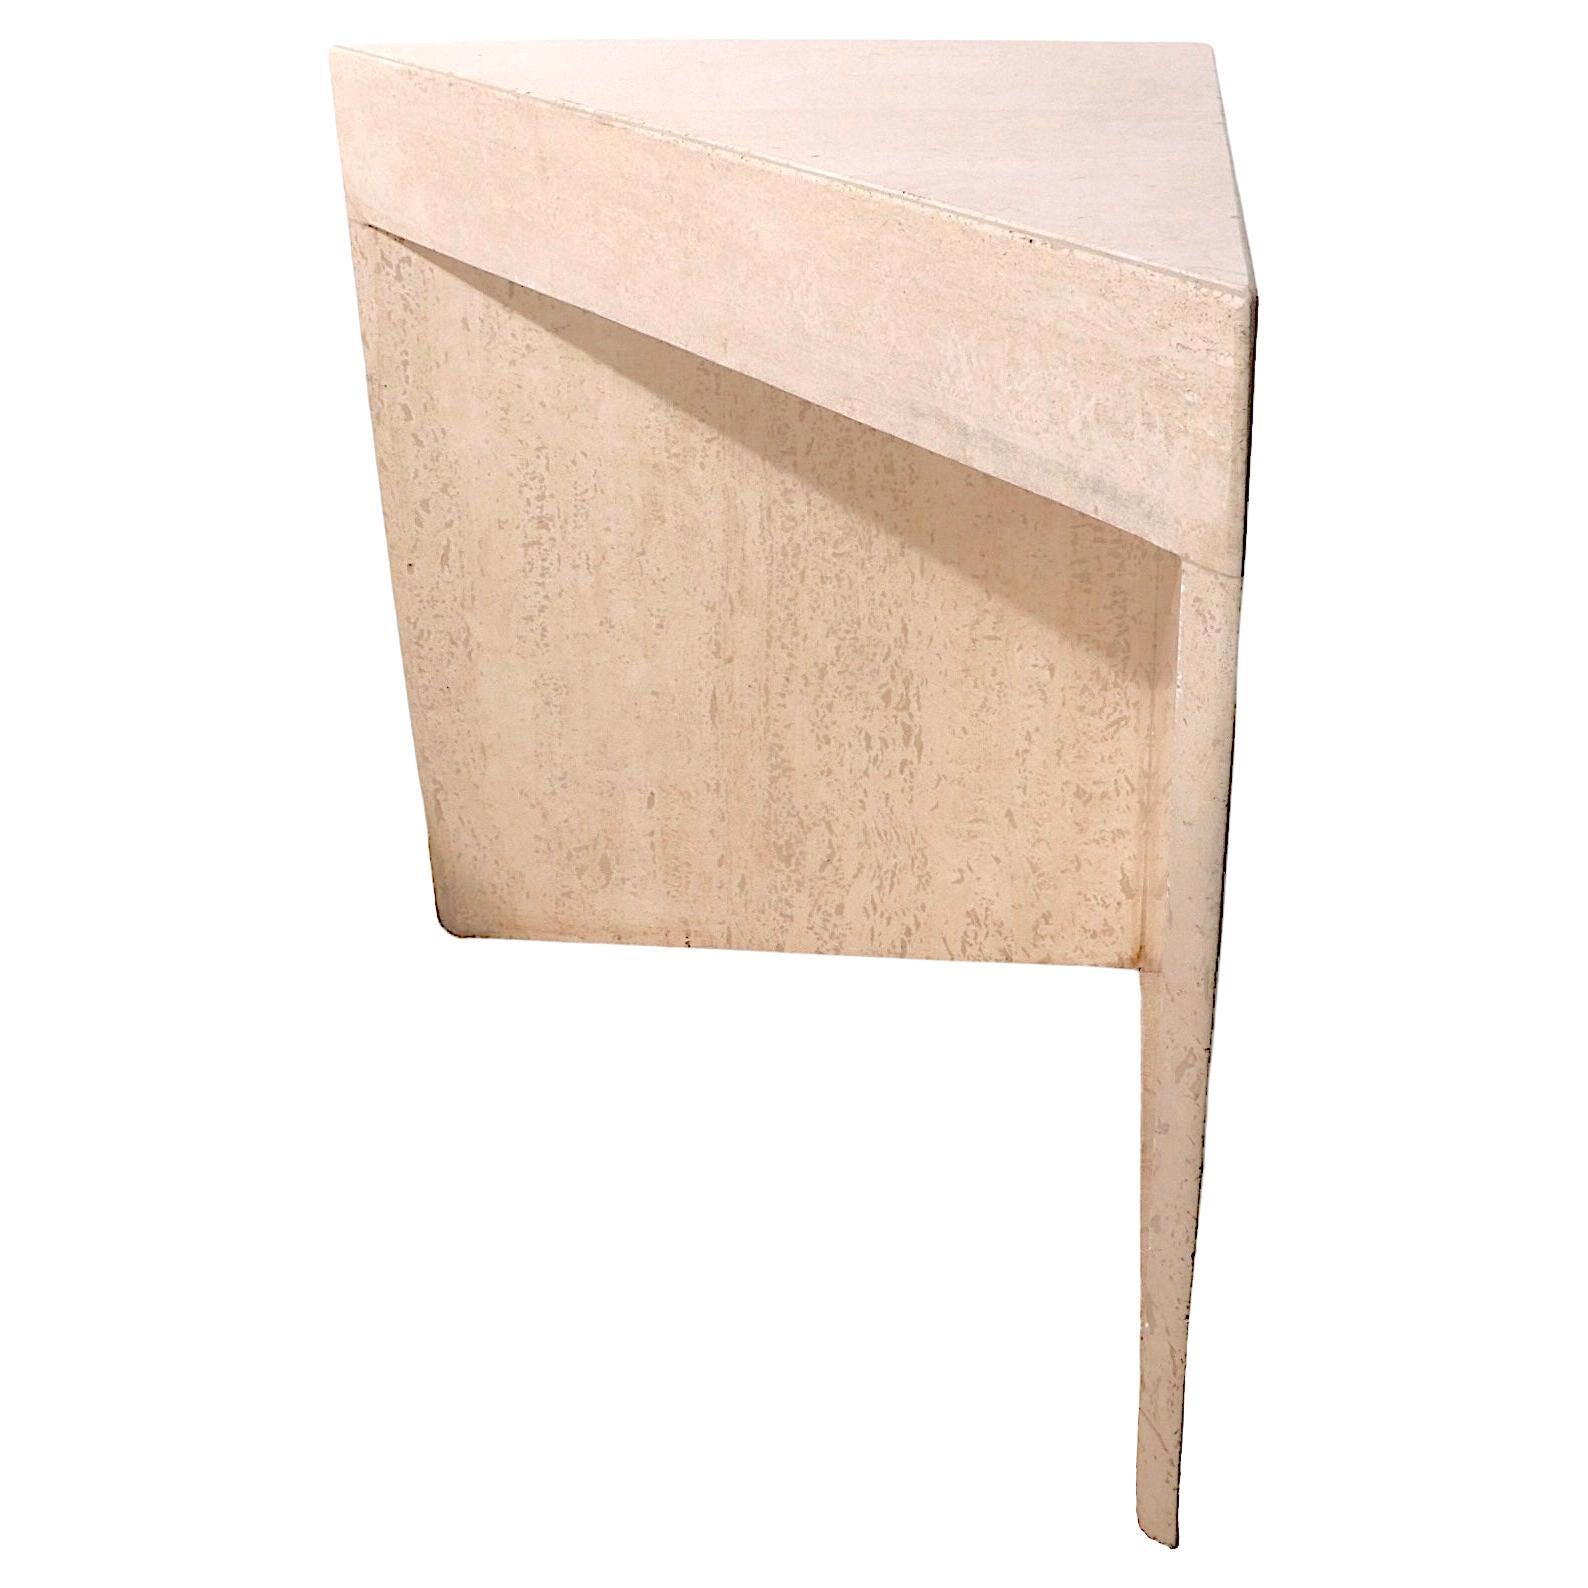 Post-Modern Italian Travertine Marble Side End Table att. to Up & Up Made in Italy c. 1970’s For Sale